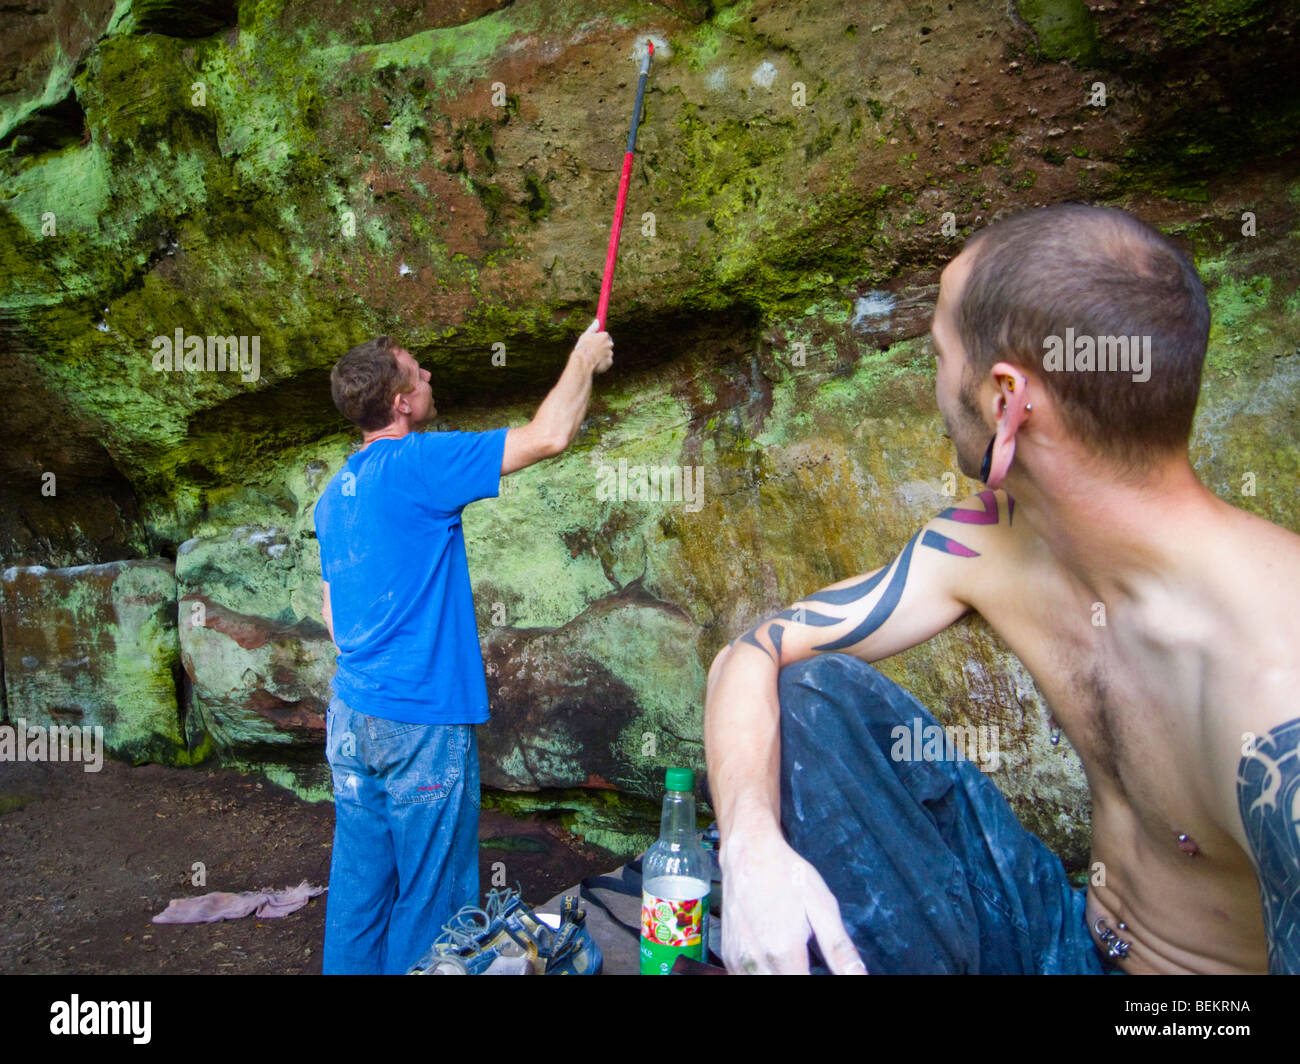 Climber cleaning a hold on a boulder problem, before trying it, whilst his friend watches Stock Photo